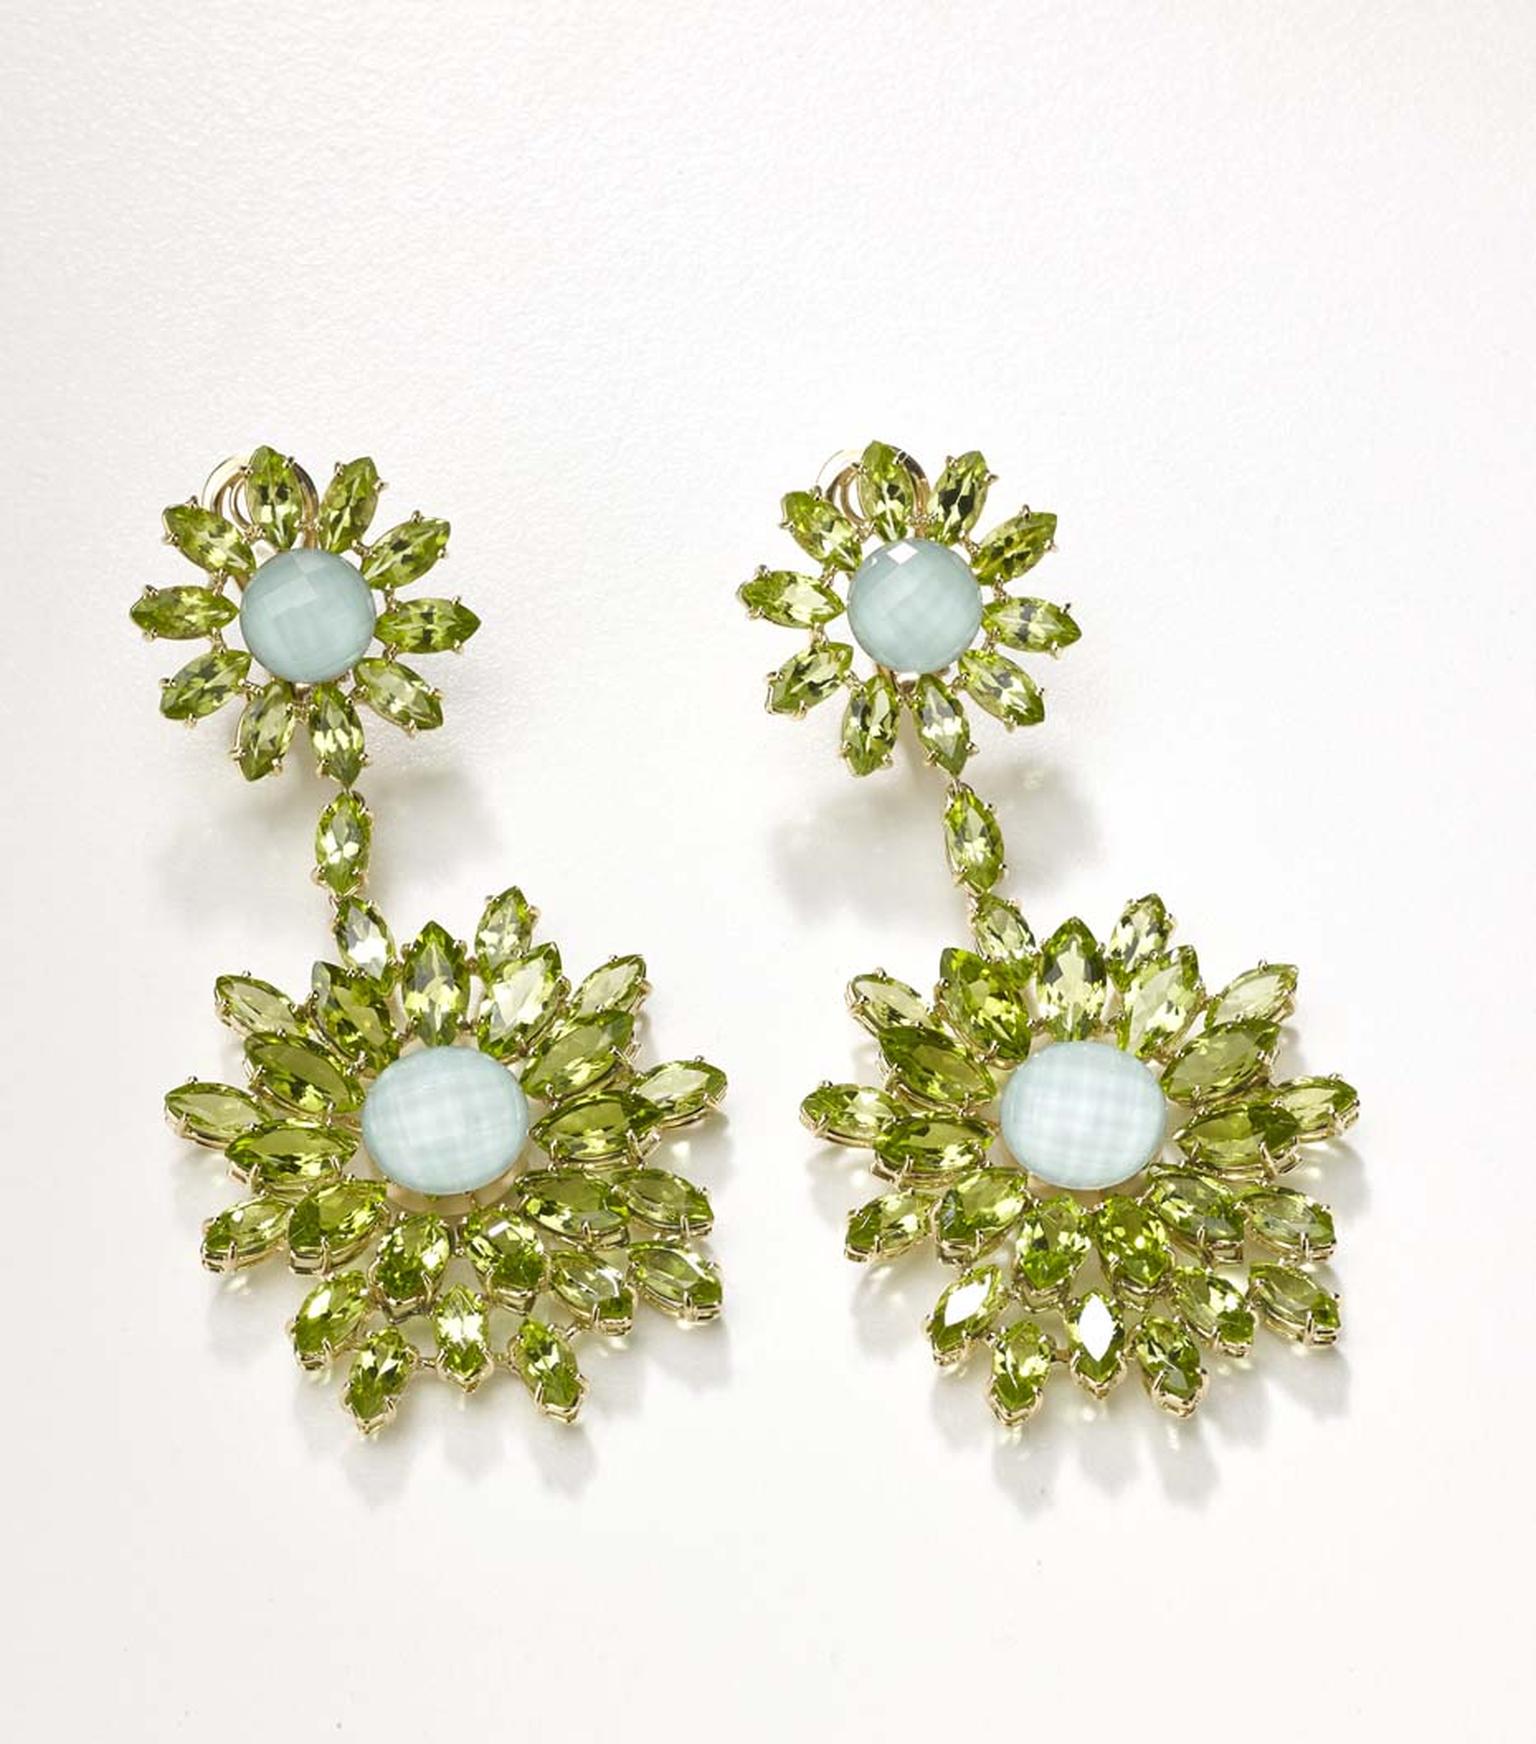 One-of-a-kind Meissen earrings with ice green porcelain and peridots from the Haute Couture collection.